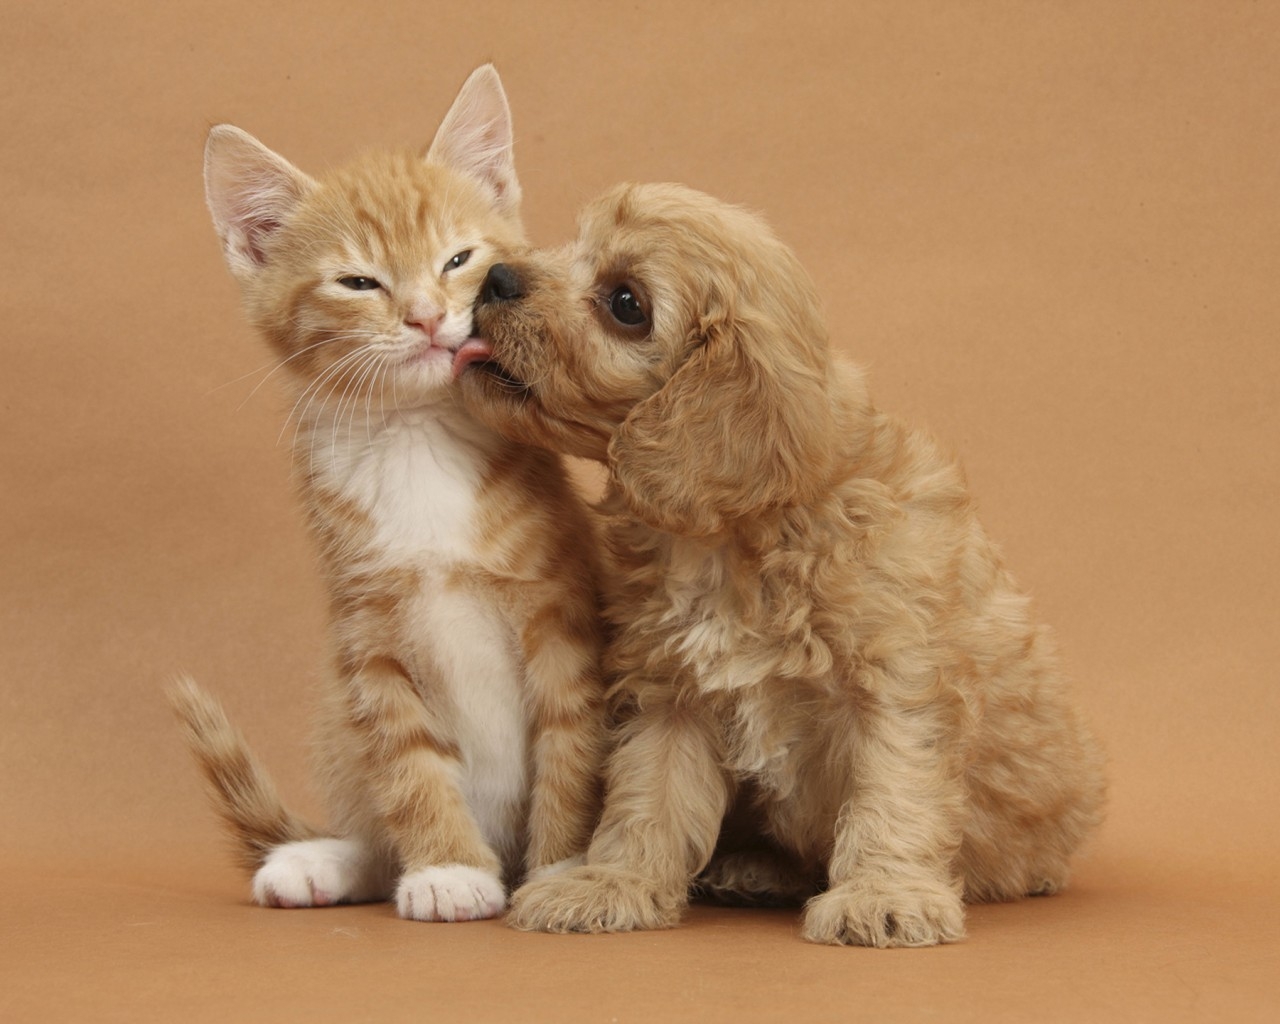 Dog and Cat Kissing for 1280 x 1024 resolution